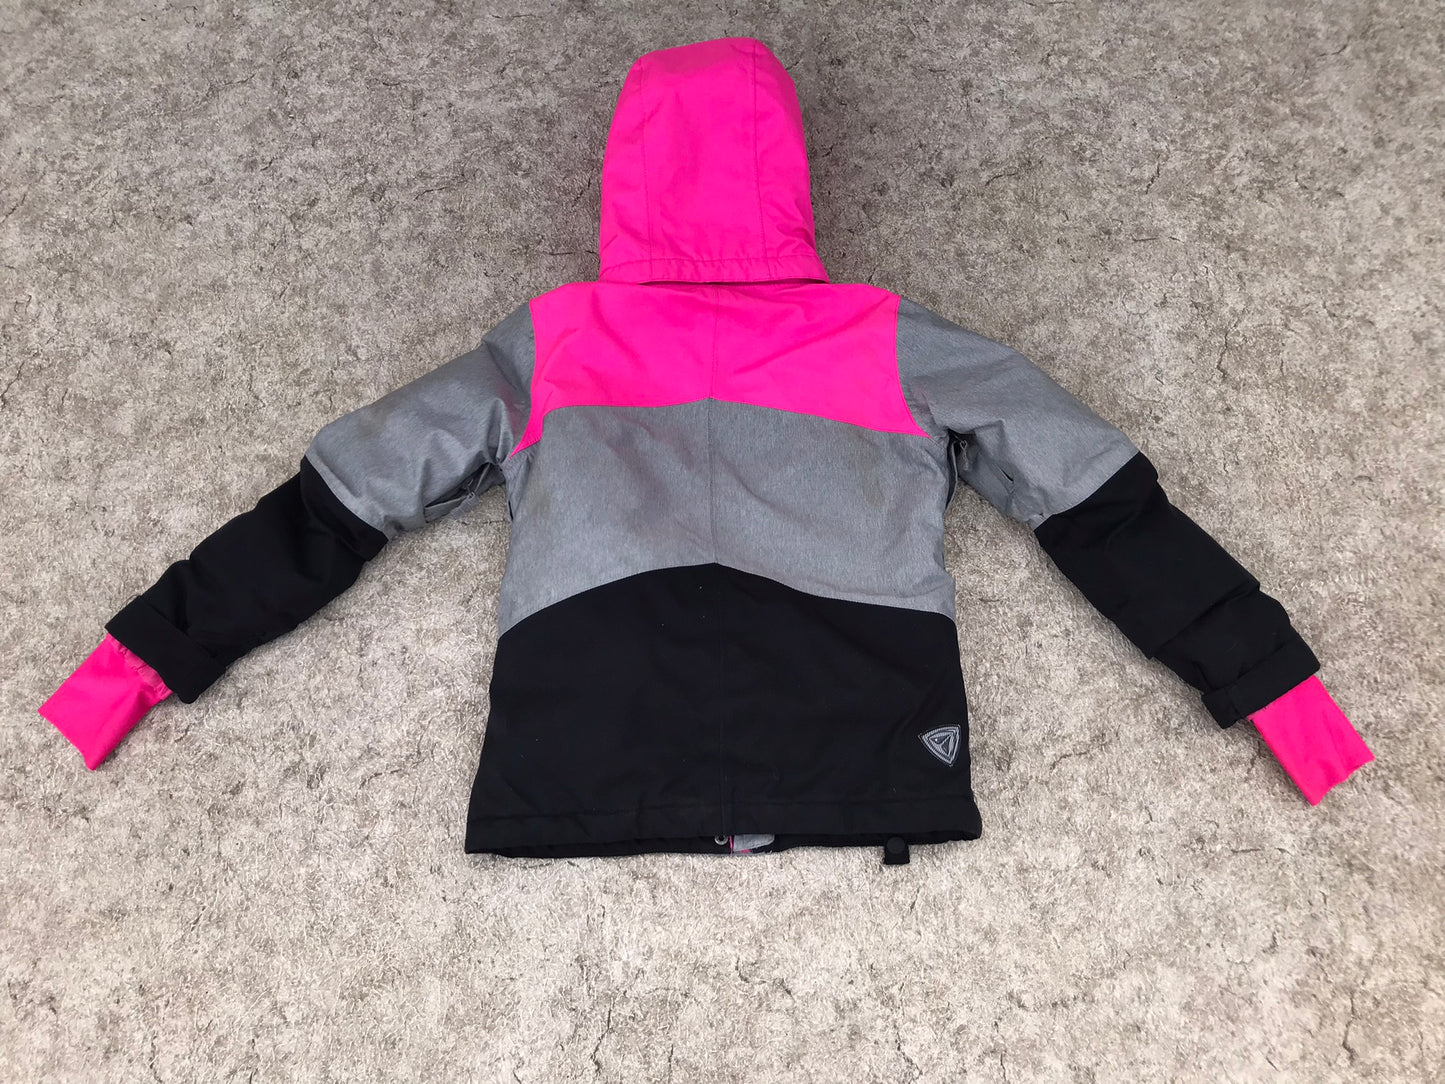 Winter Coat Child Size 8-10 FireFly Grey Black Pink With Snow Belt